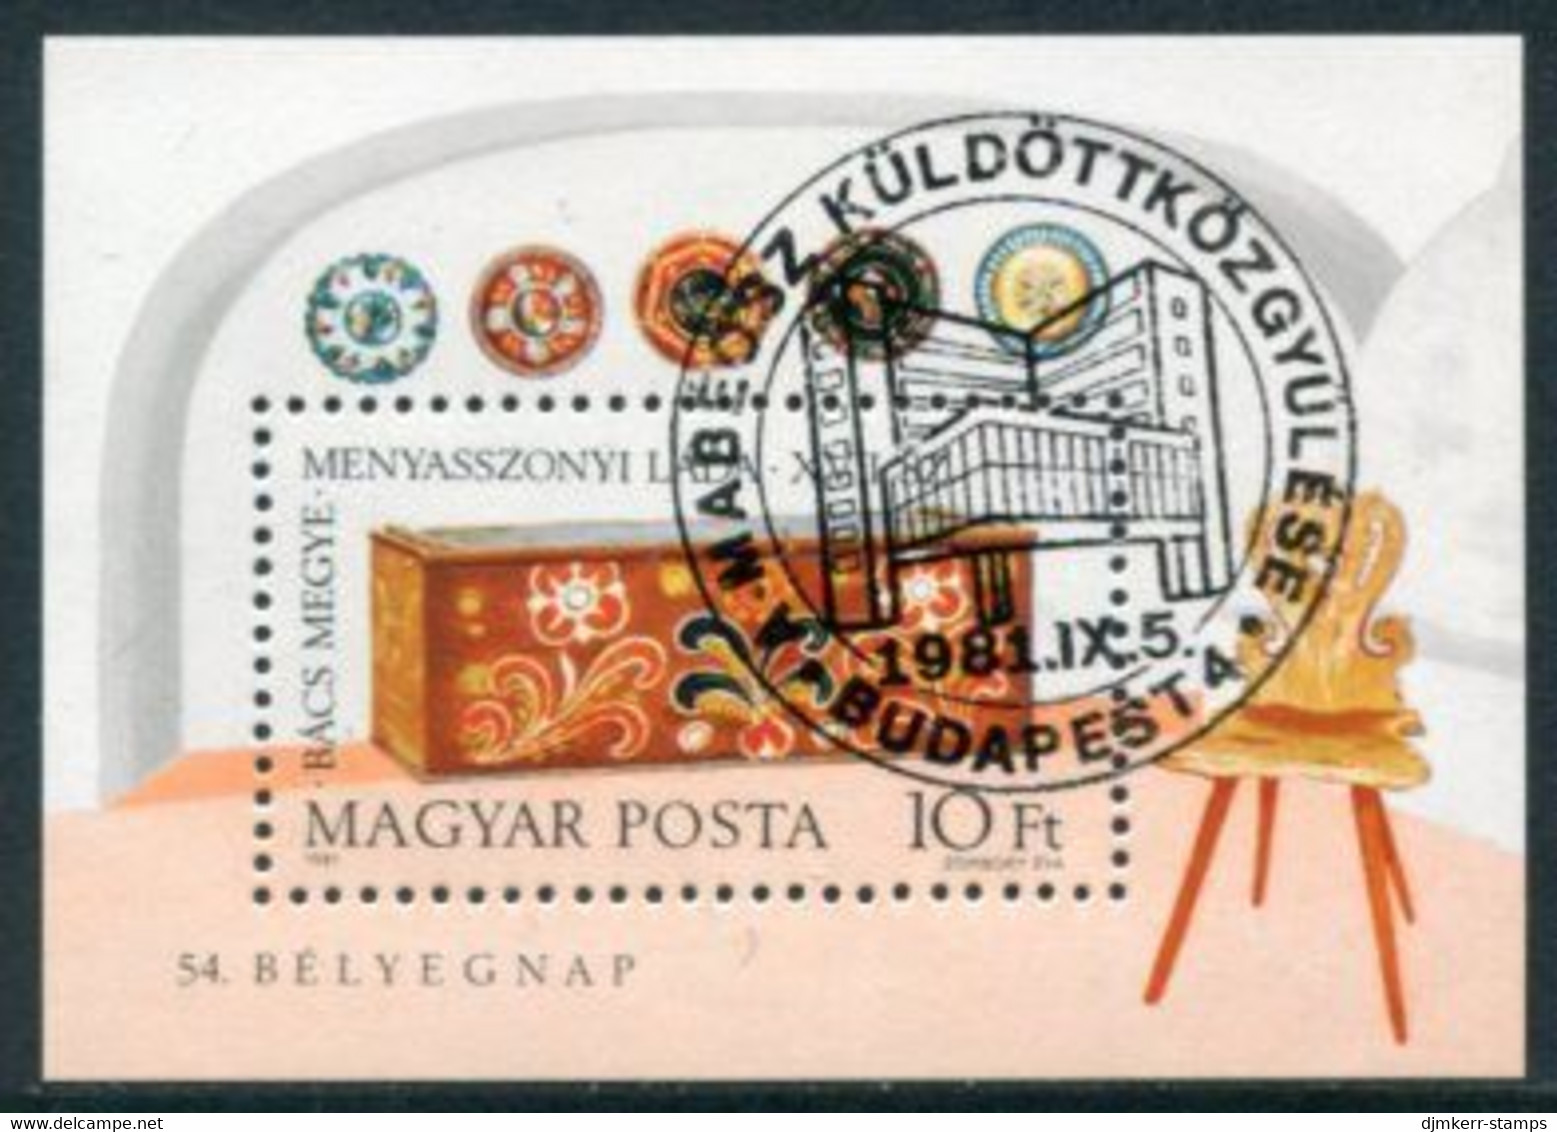 HUNGARY 1981 Stamp Day Block Used.  Michel Block 151 - Hojas Bloque